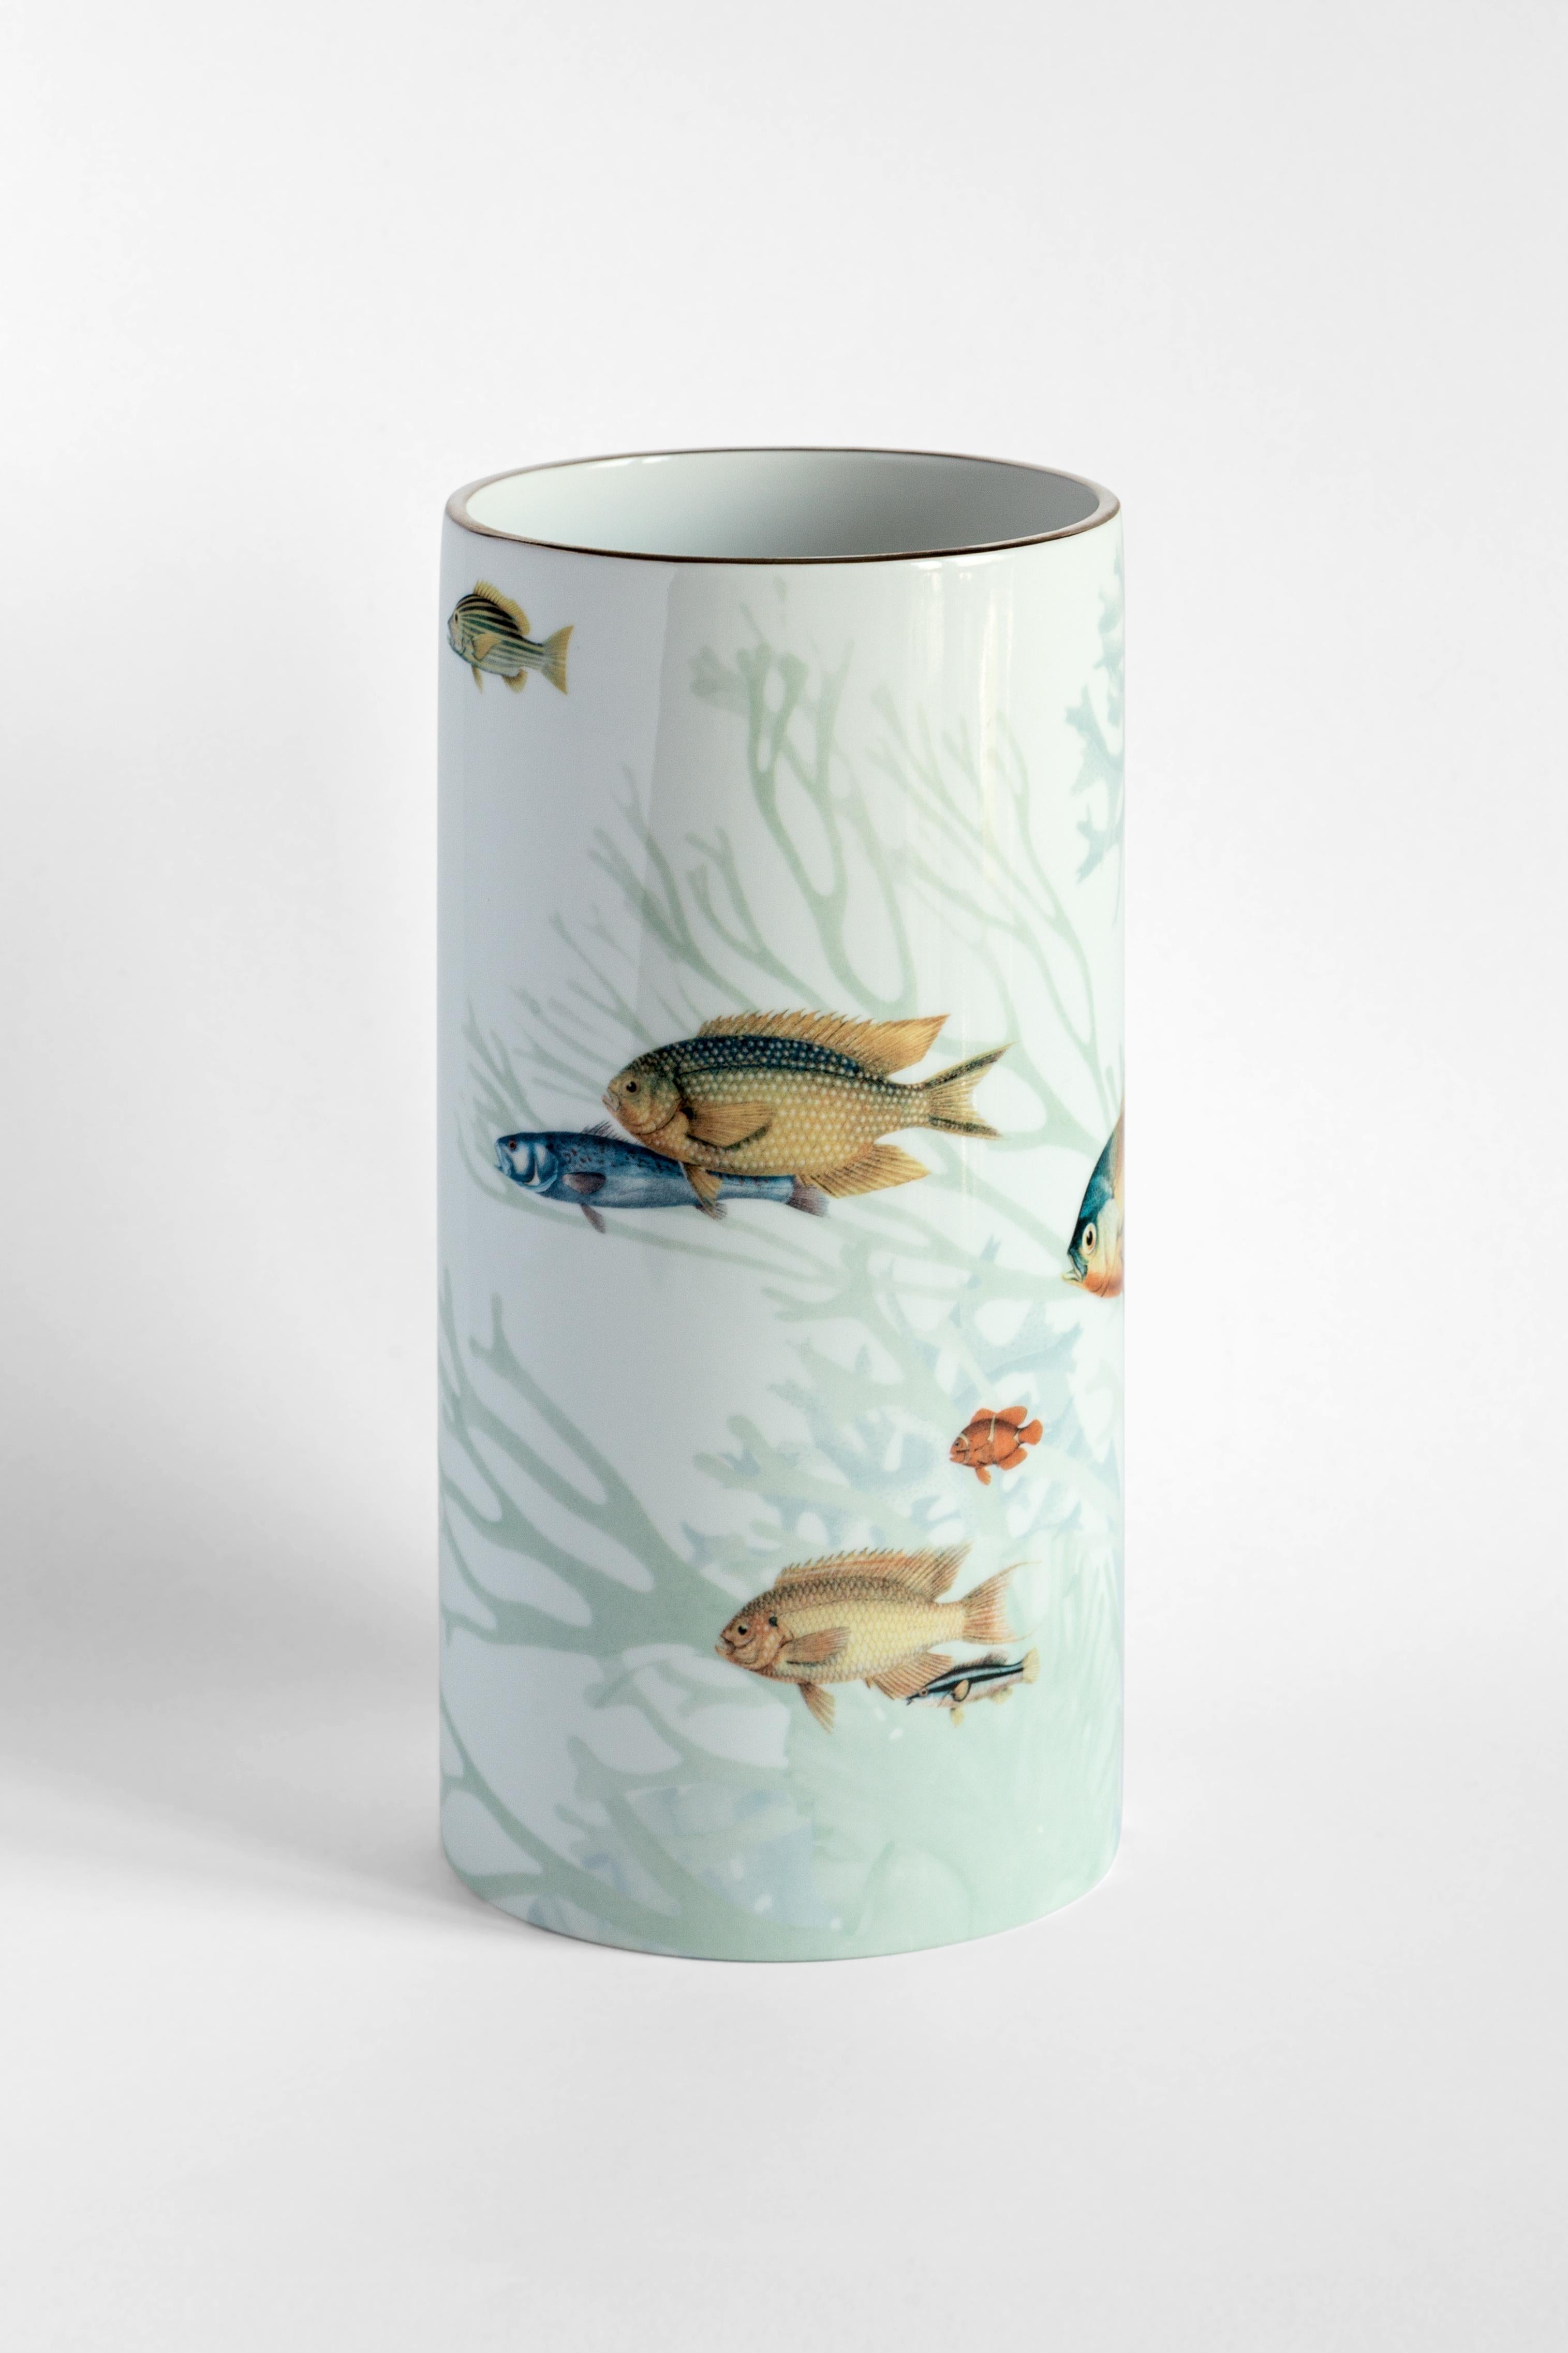 Inspired by the Japanese Amami Islands ringed by coral reefs, this joyful vase designed by Vito Nesta features a playful pattern of different-sized fish in dazzling colors. Crafted of Fine porcelain, this vase will make a delightful addition to a